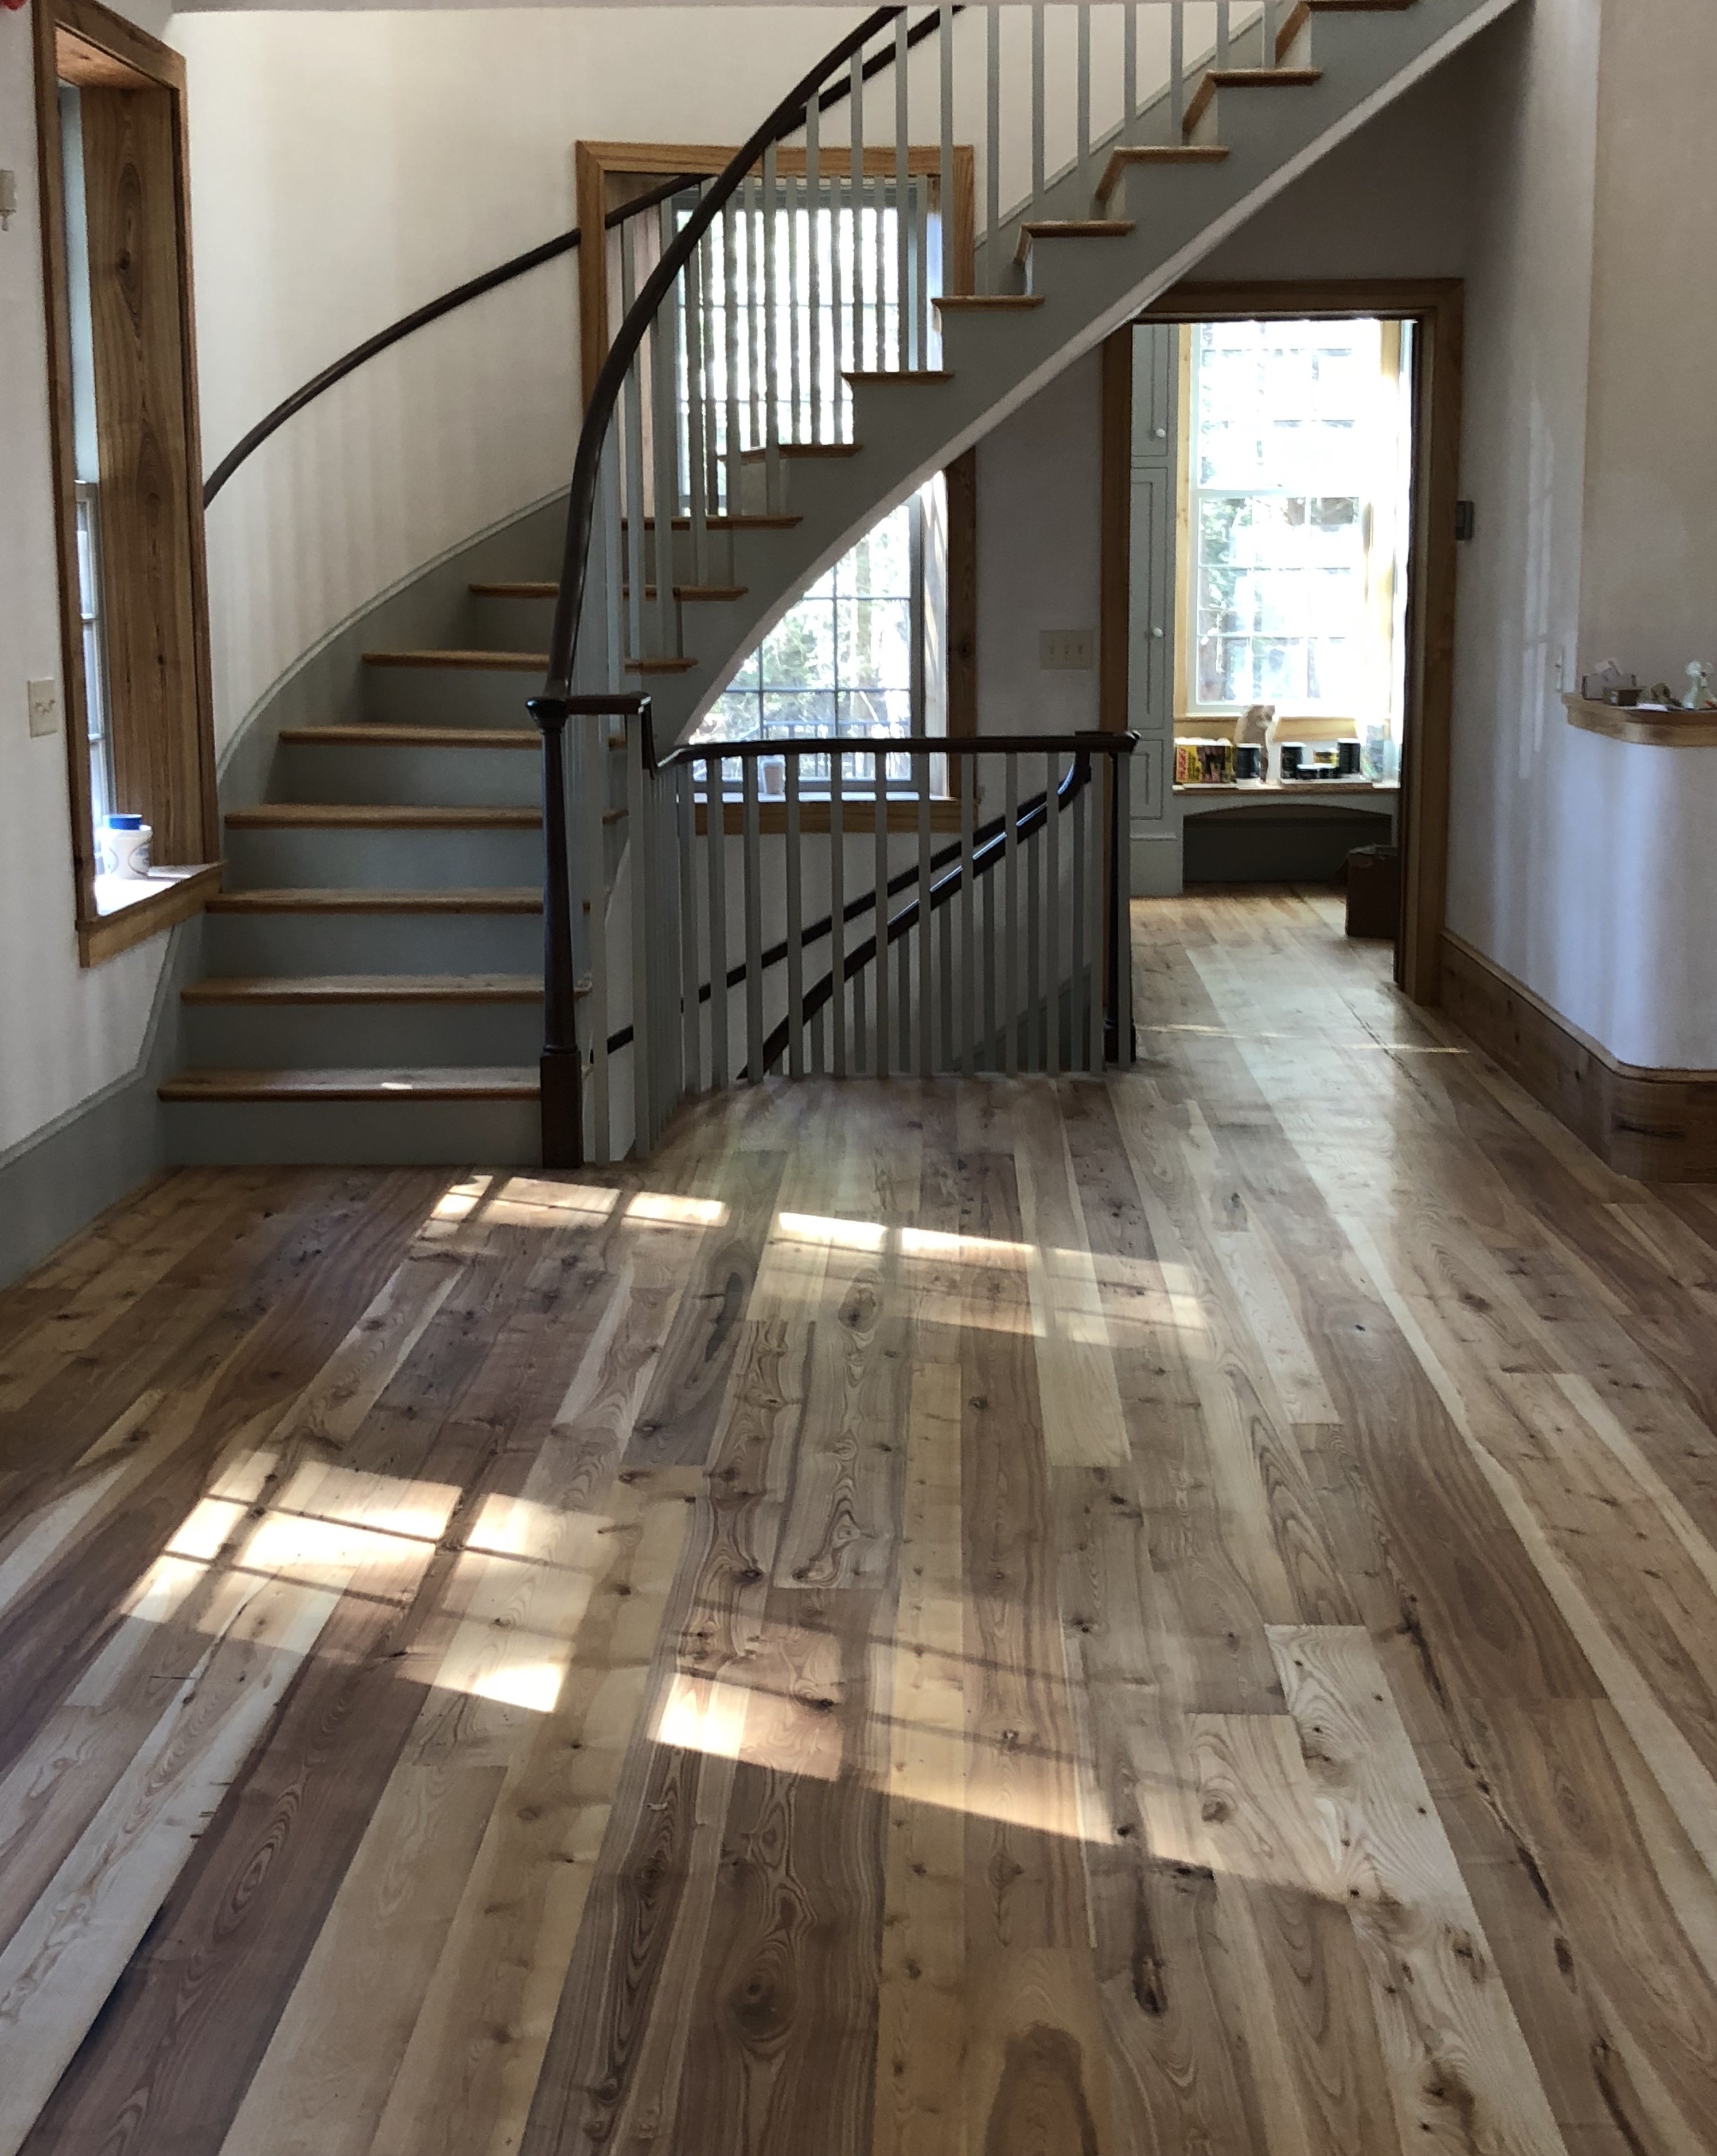 Residential flooring made from antique ash lumber in South Freeeport, Maine sourced by Rousseau Reclaimed Lumber & Flooring